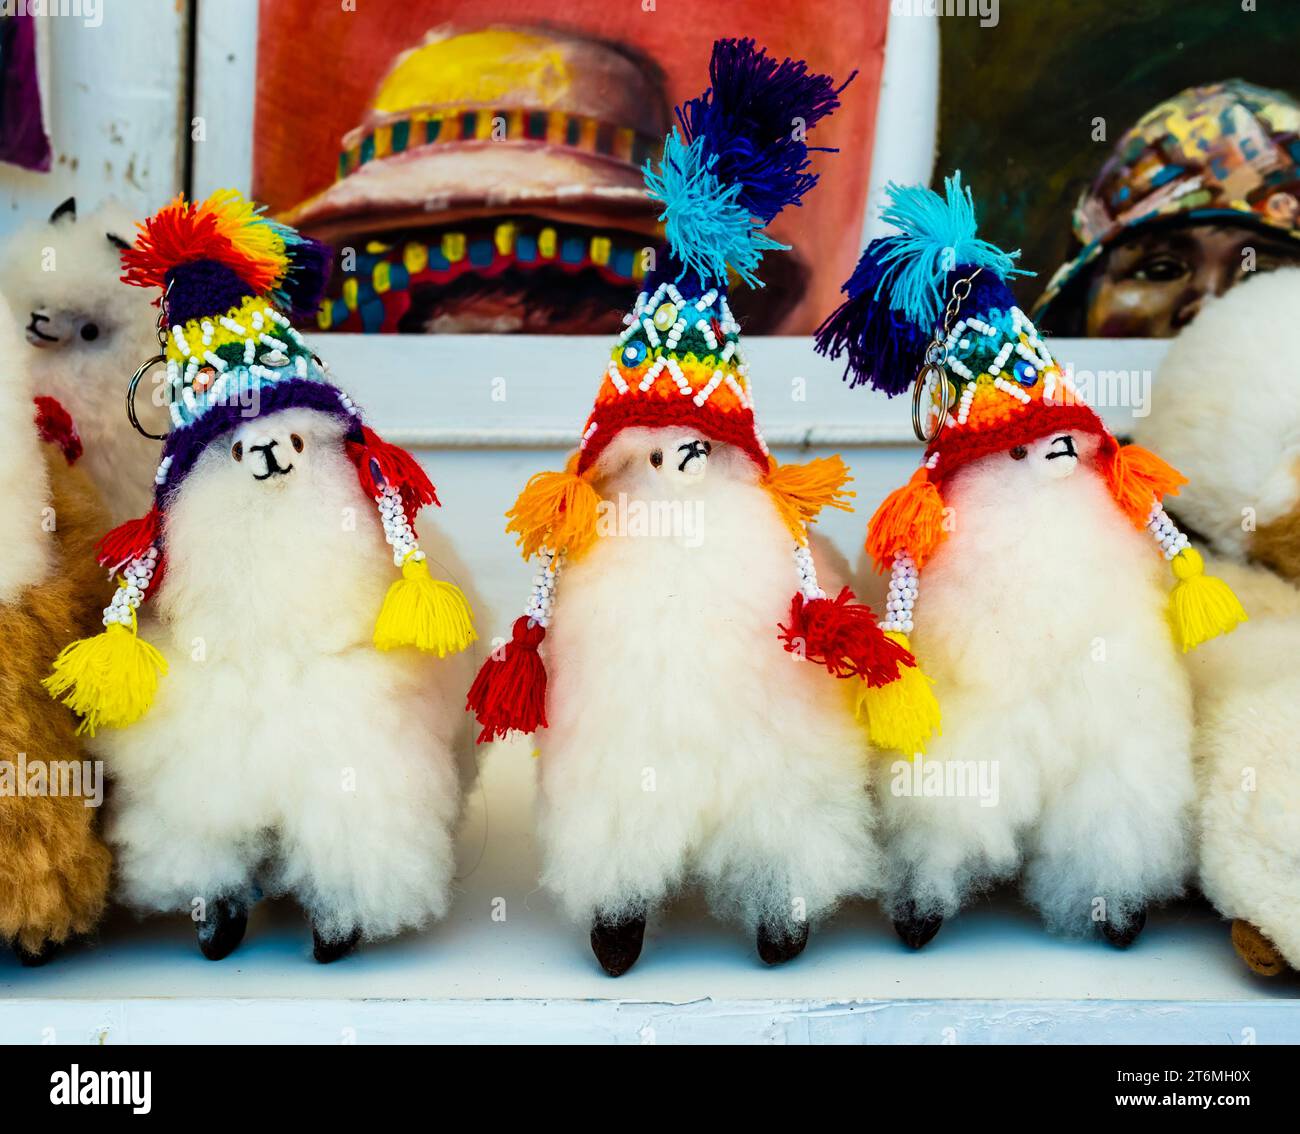 Row of alpaca plush toys with traditional rainbow-colored hats, Pisac traditional market, Peru Stock Photo